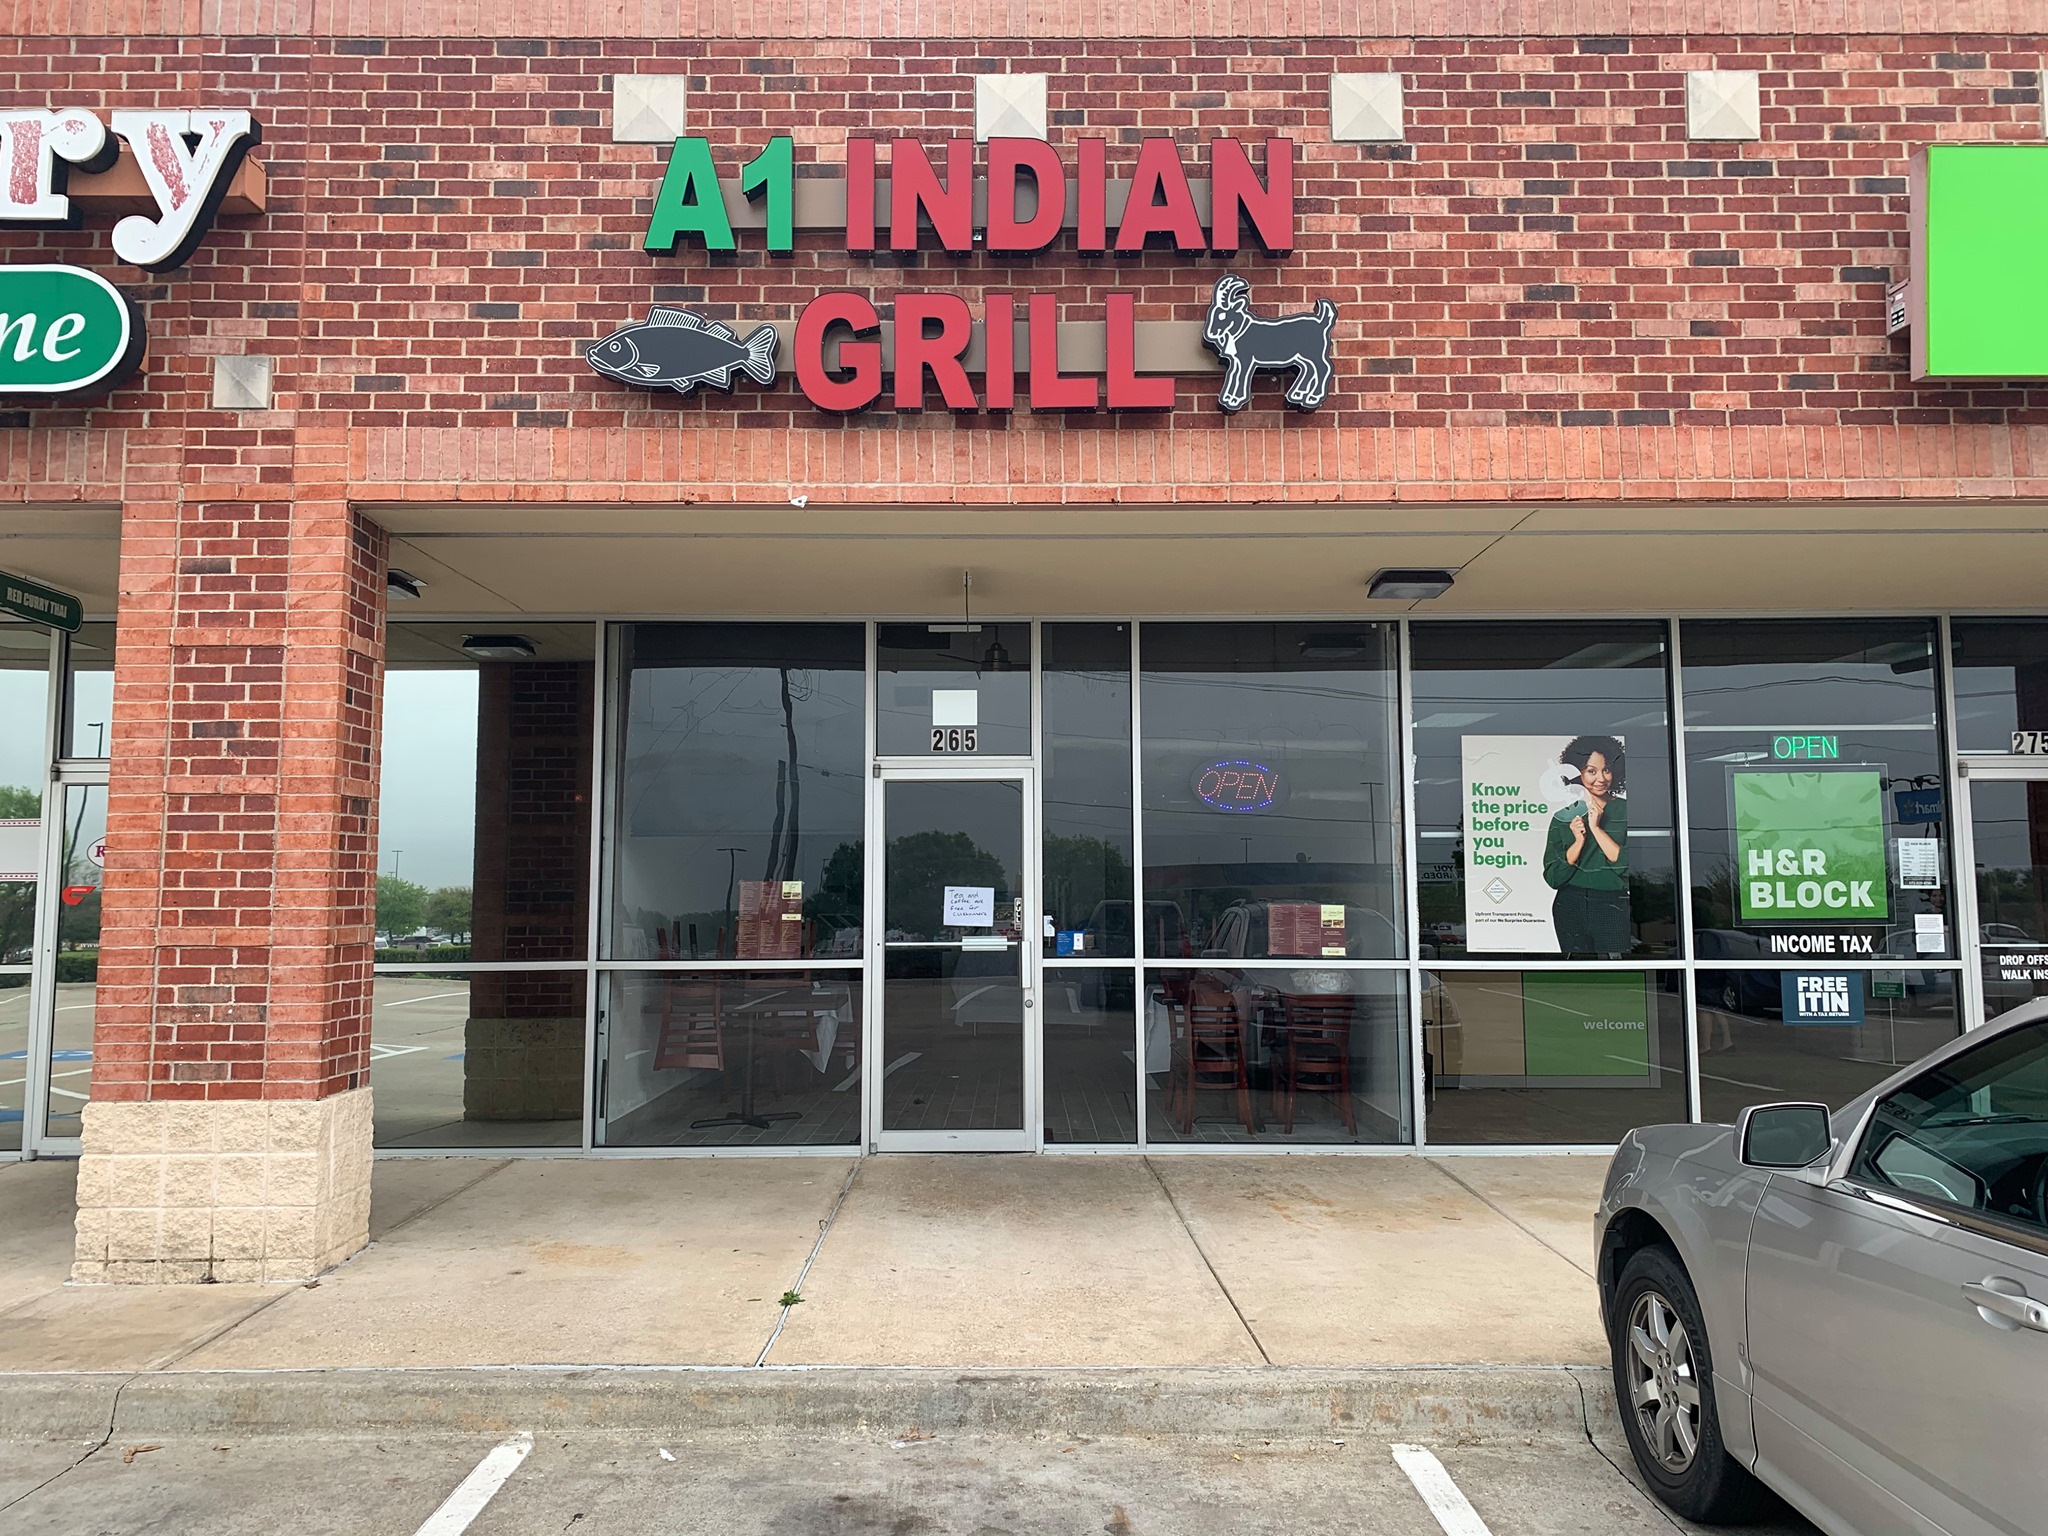 A1 Indian Grill